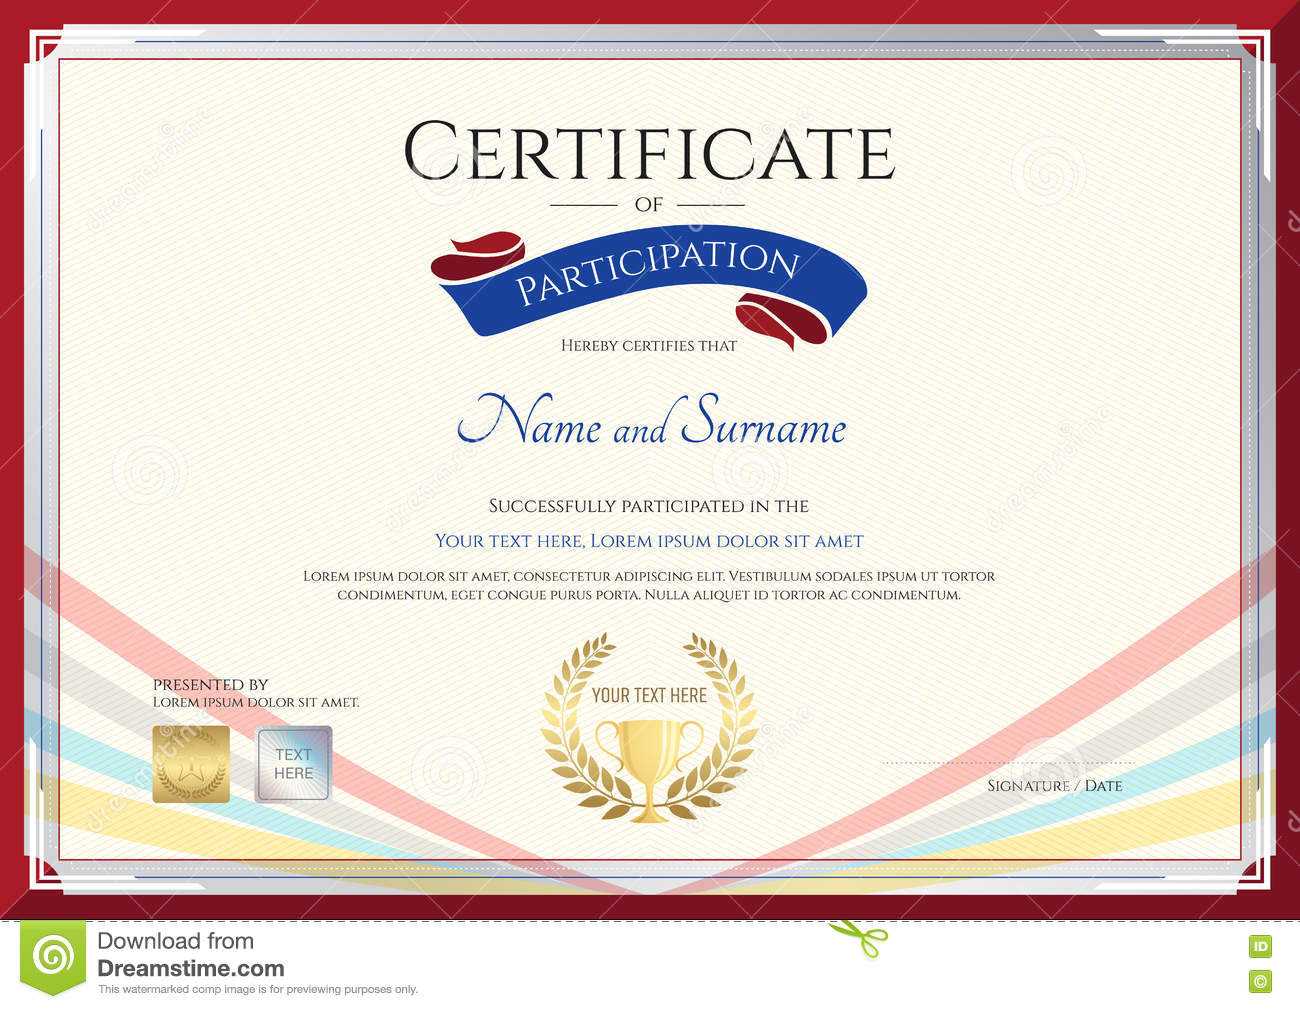 Certificate Template For Achievement, Appreciation Or Throughout Participation Certificate Templates Free Download